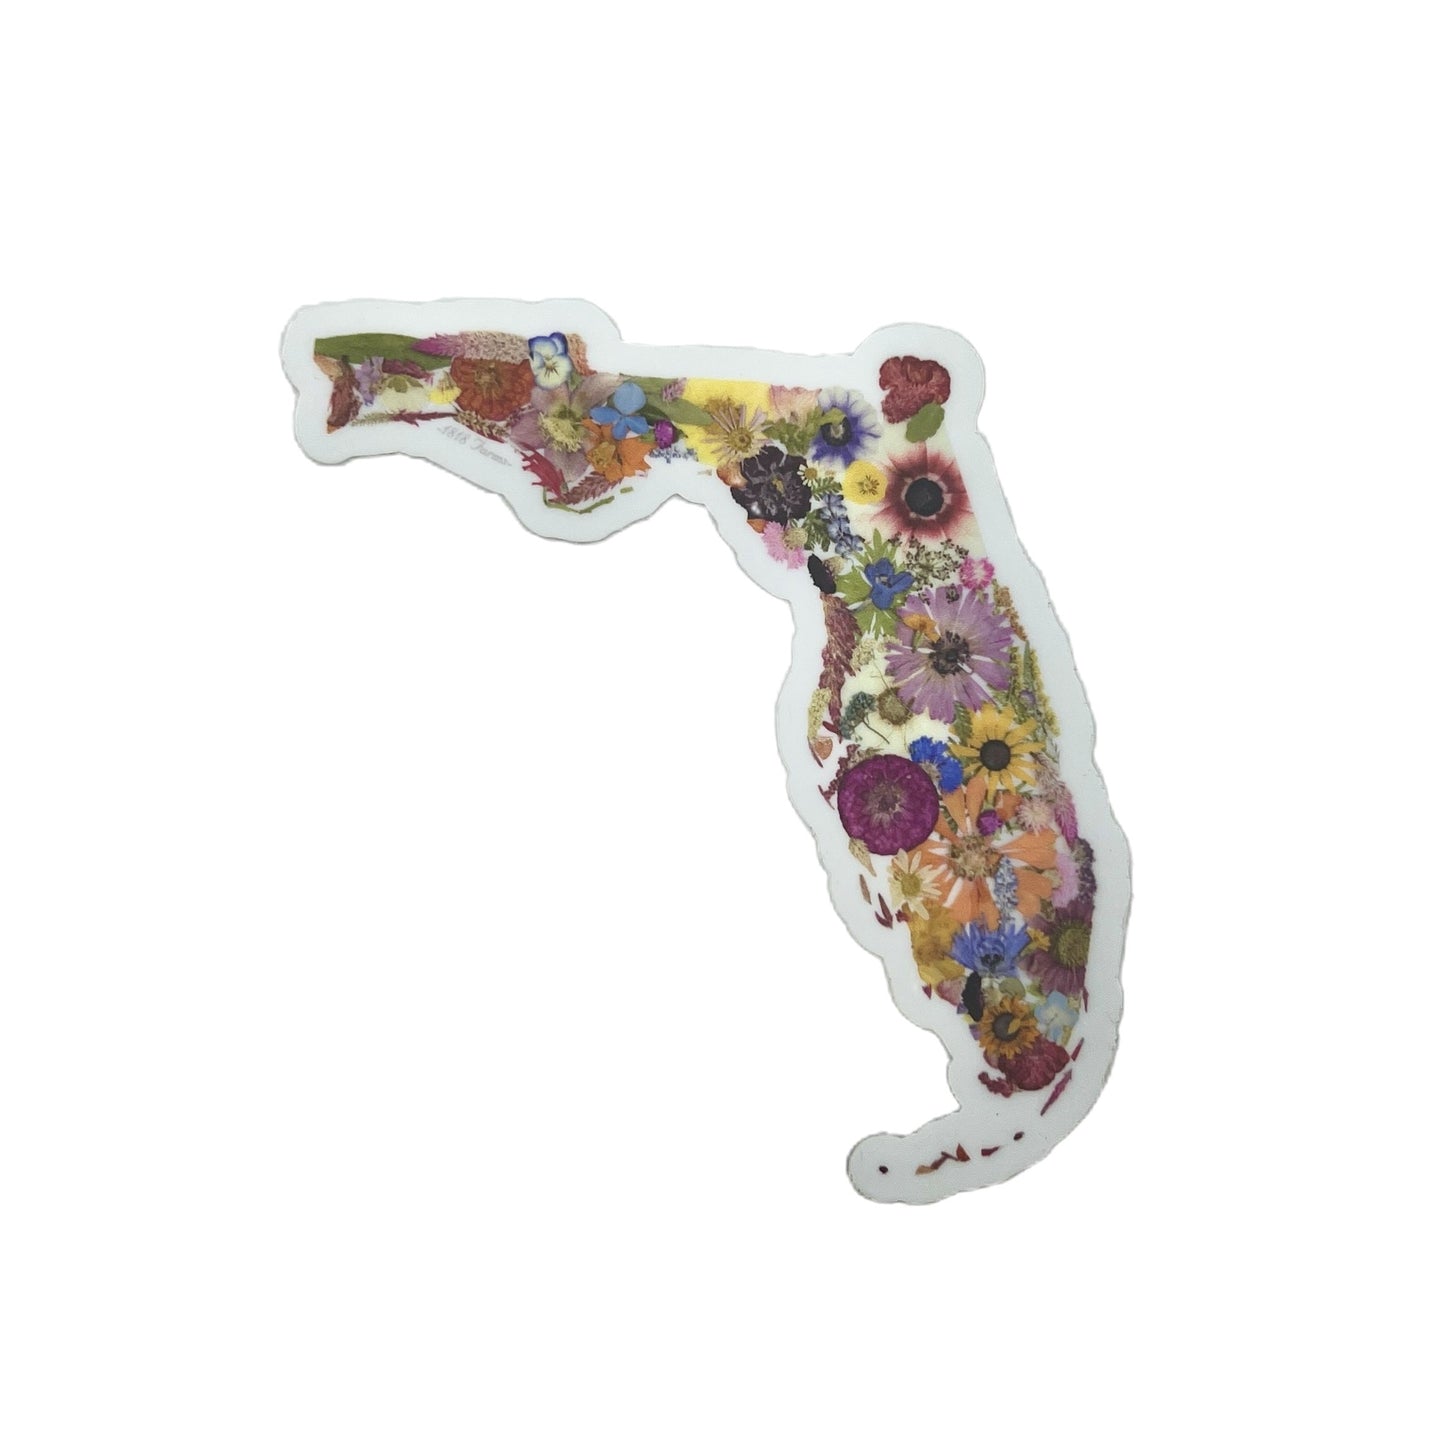 State Themed Vinyl Sticker  - "Where I Bloom" Collection Vinyl Sticker 1818 Farms Florida  